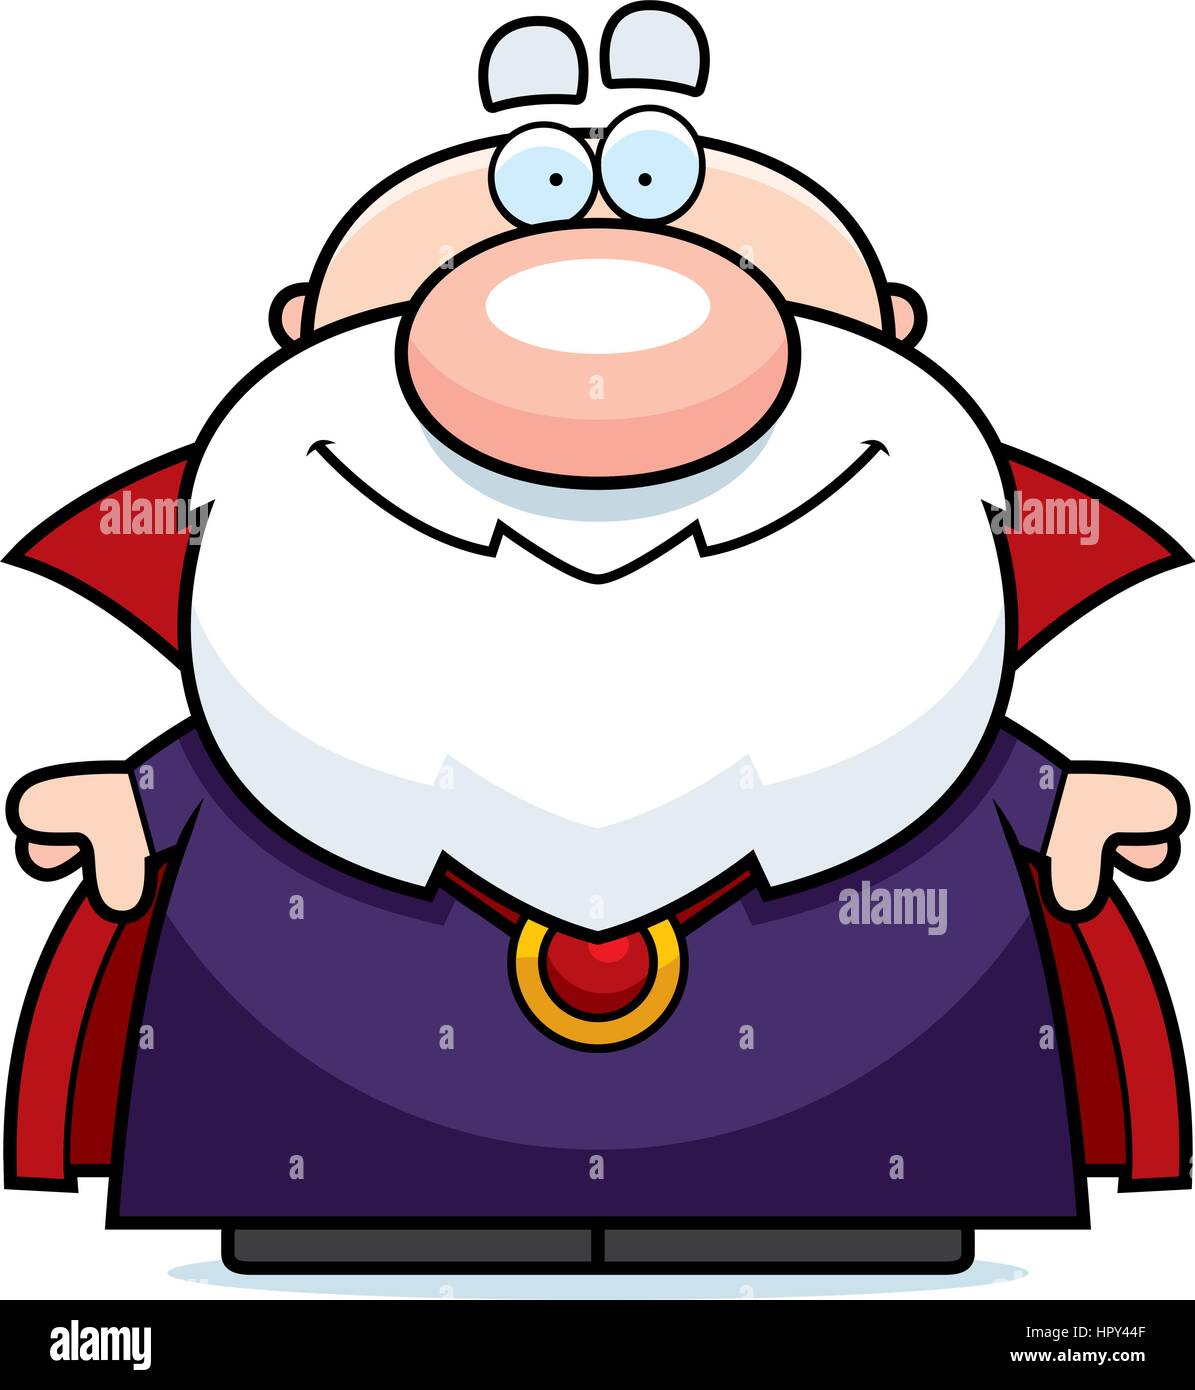 A happy cartoon wizard standing and smiling. Stock Vector